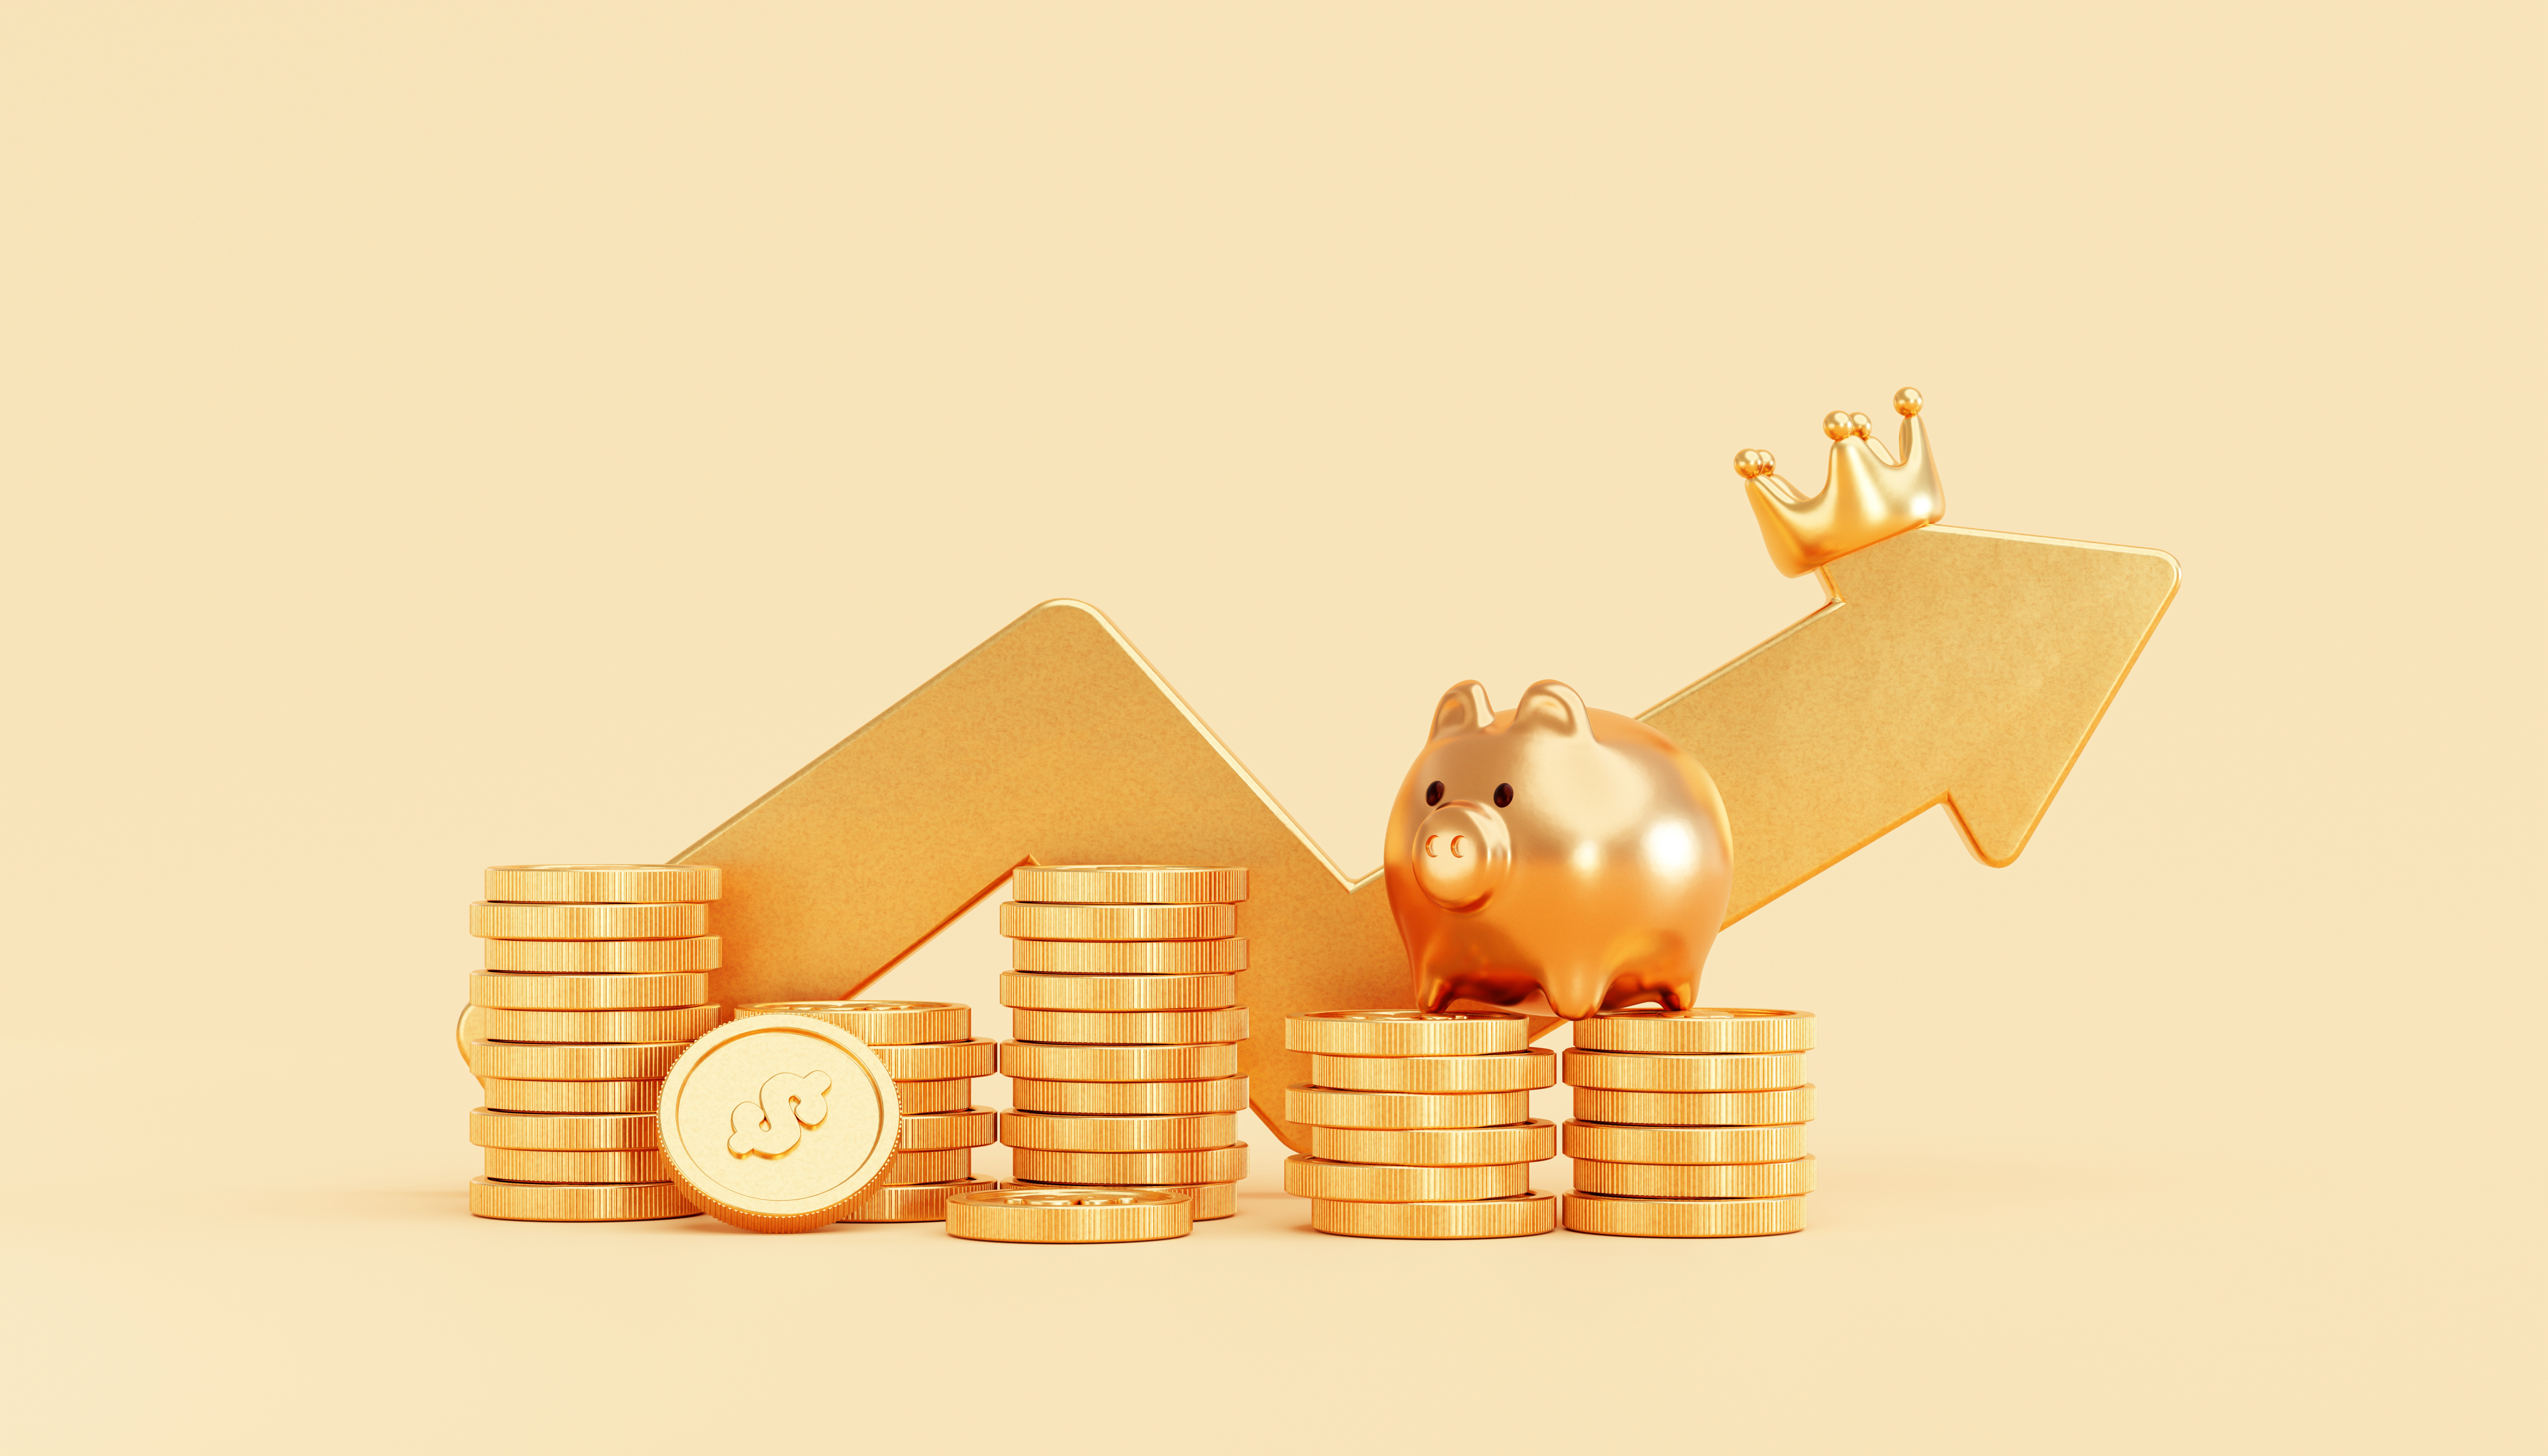 https://img.moneyduck.com/article_attachment/1671767359-gold-piggy-bank-with-gold-coin-money-stacks-growing-arrow-business-finance-savings-investment-concept-background-3d-illustration.jpg